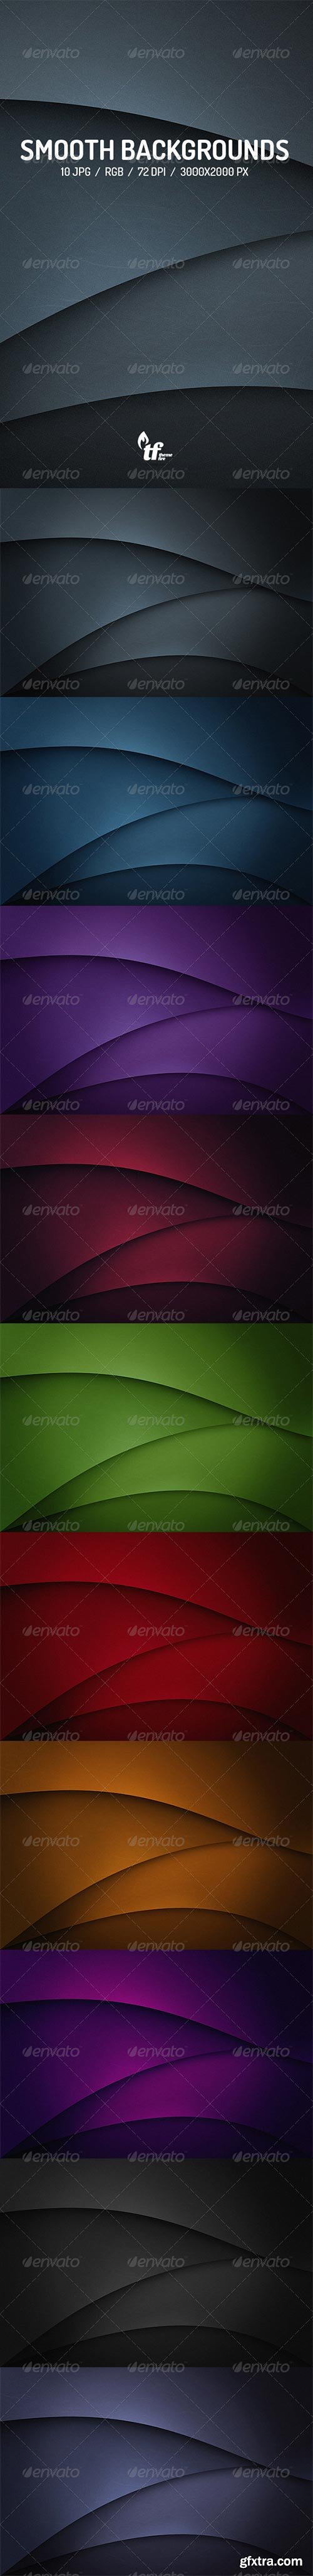 GraphicRiver - Flat Smooth Flow Backgrounds 7763856